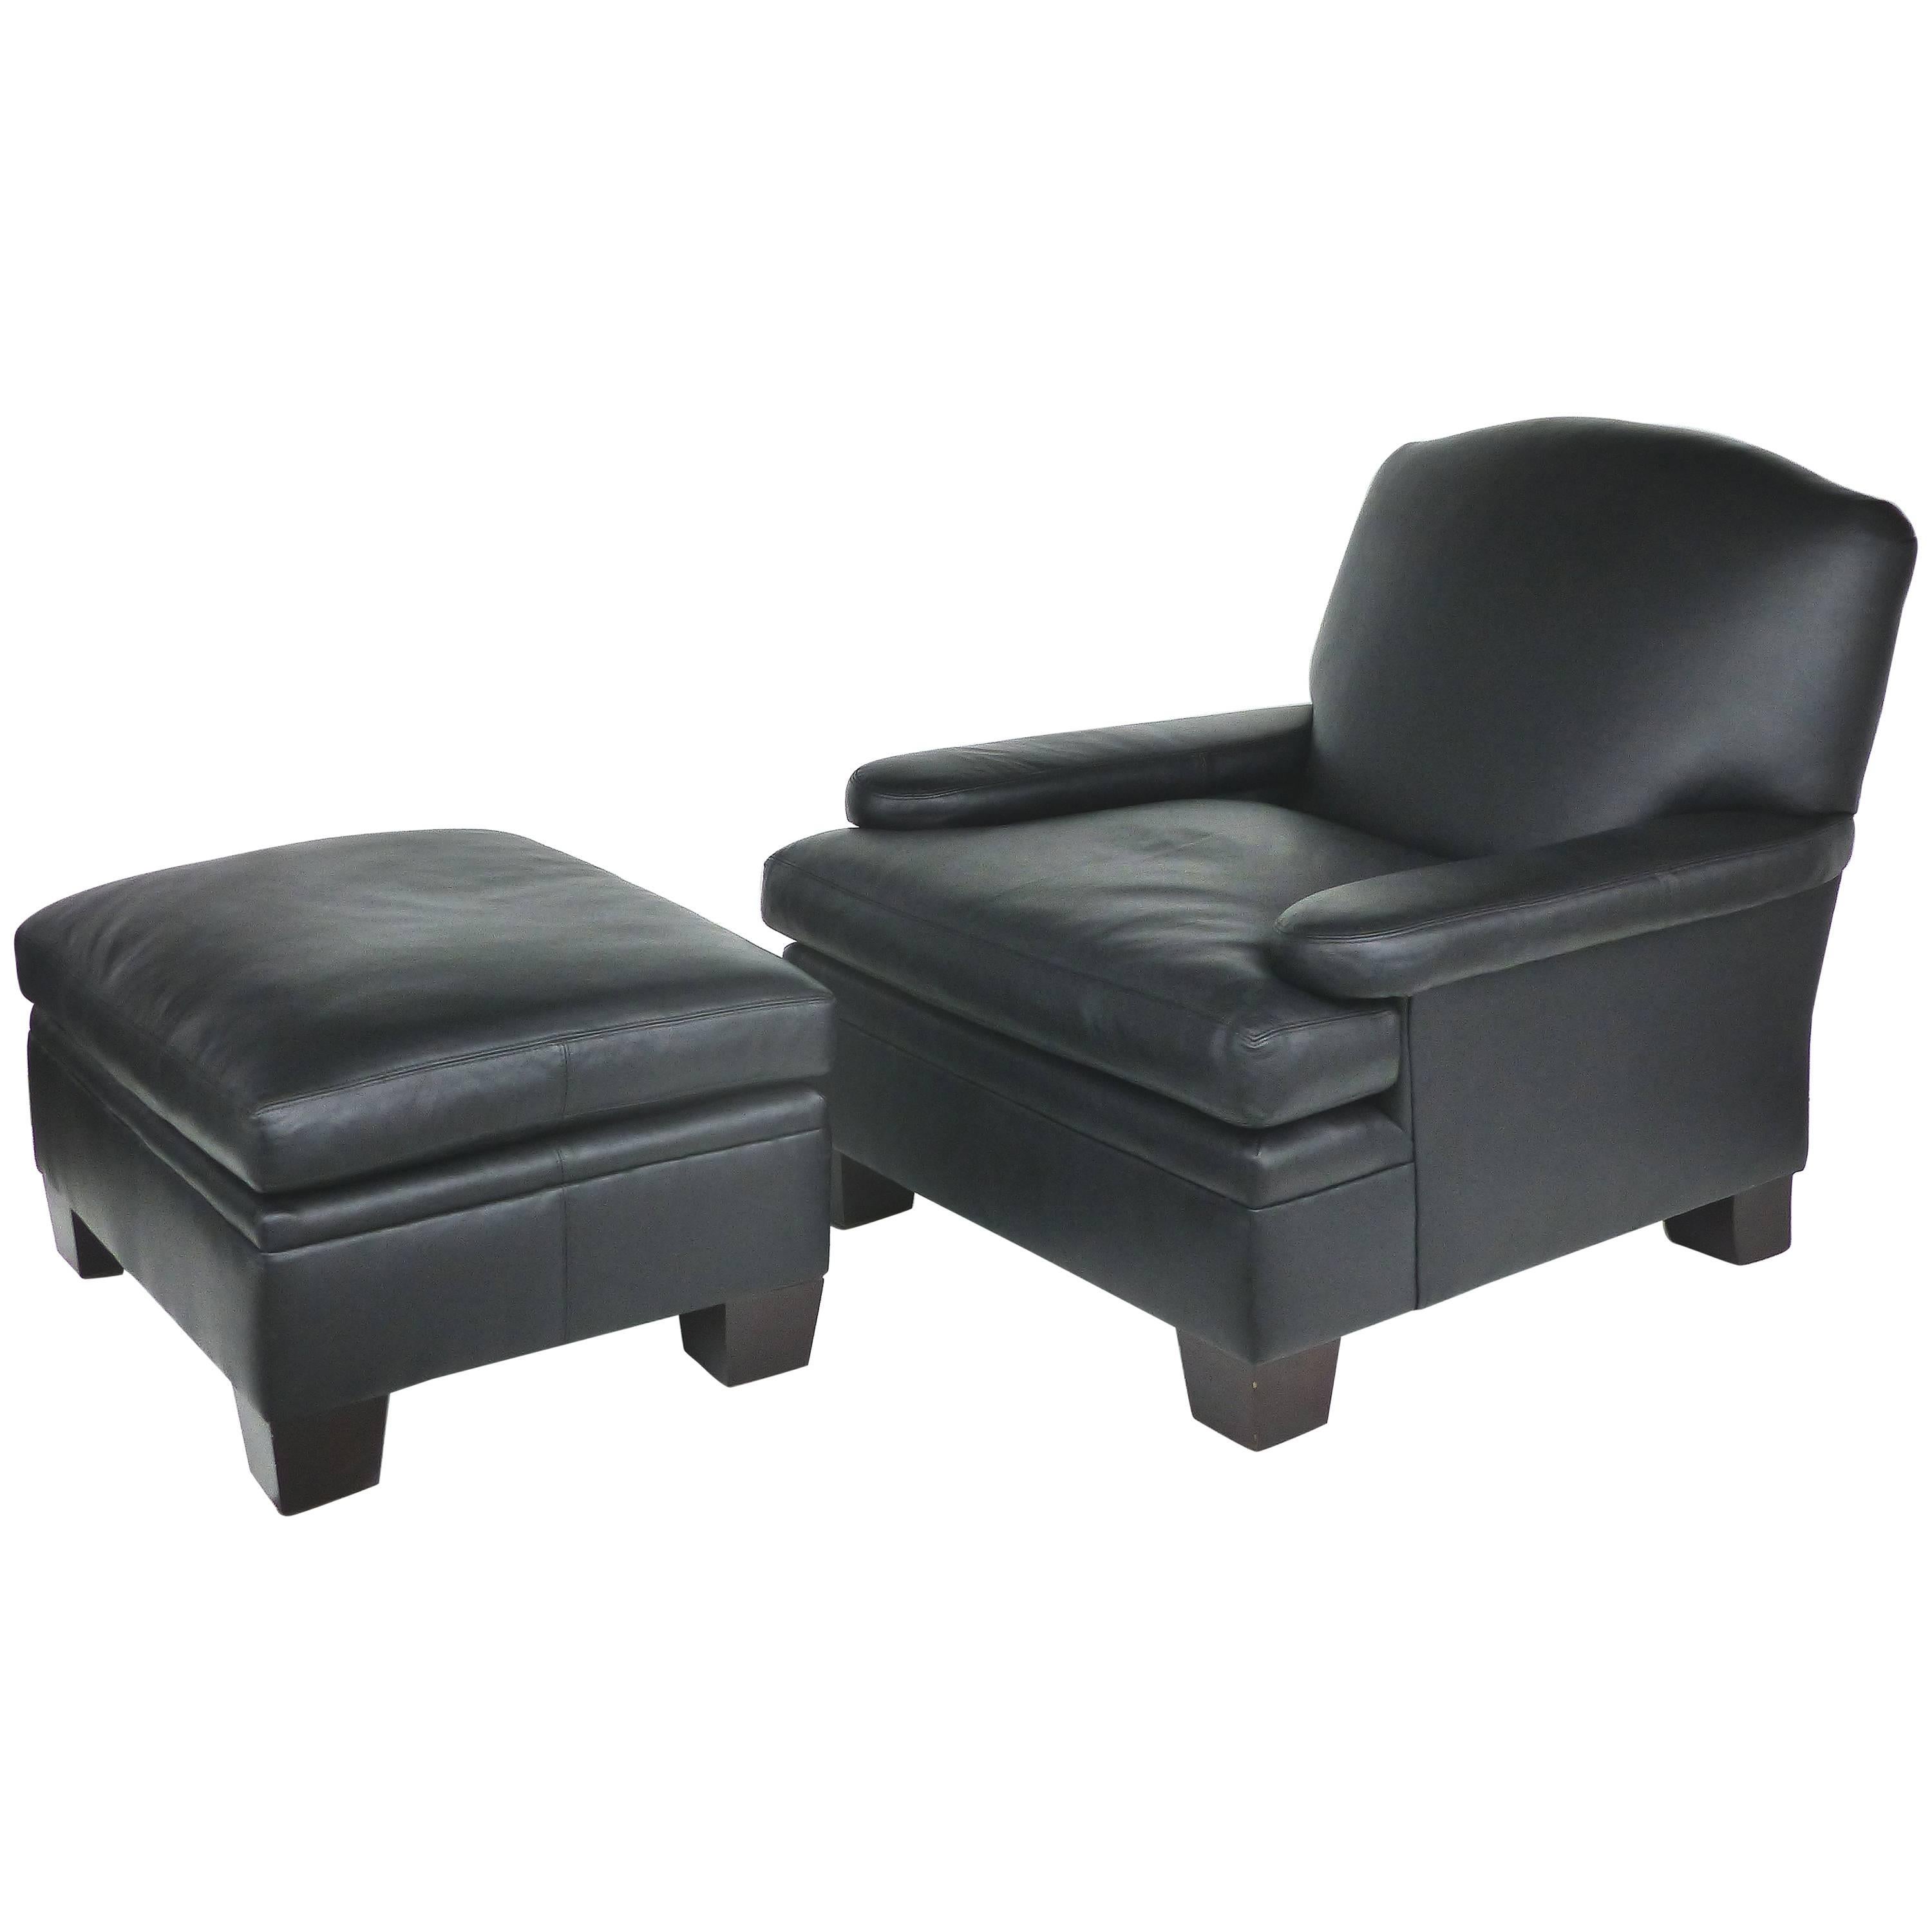 Ralph Lauren London Leather Club Chair with Matching Ottoman